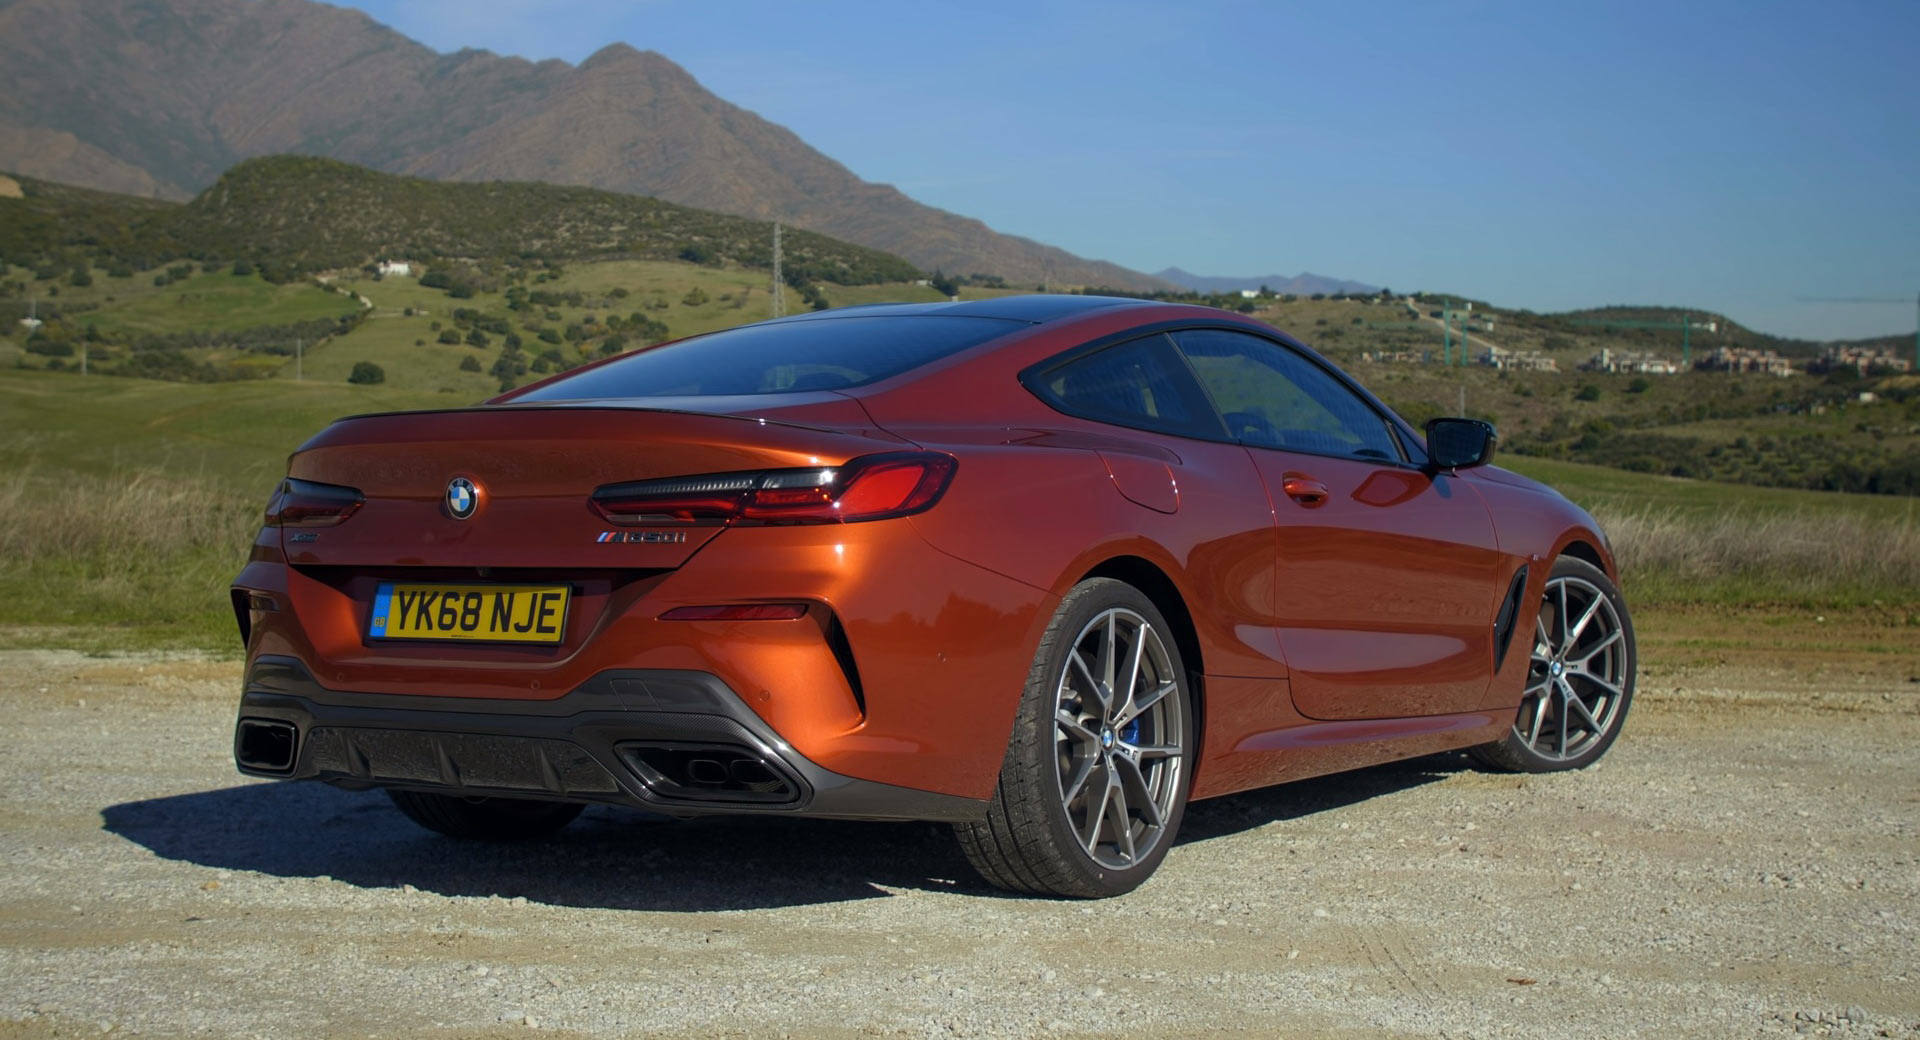 New BMW 8Series Is A Playful GT, But Does It Justify Its Price